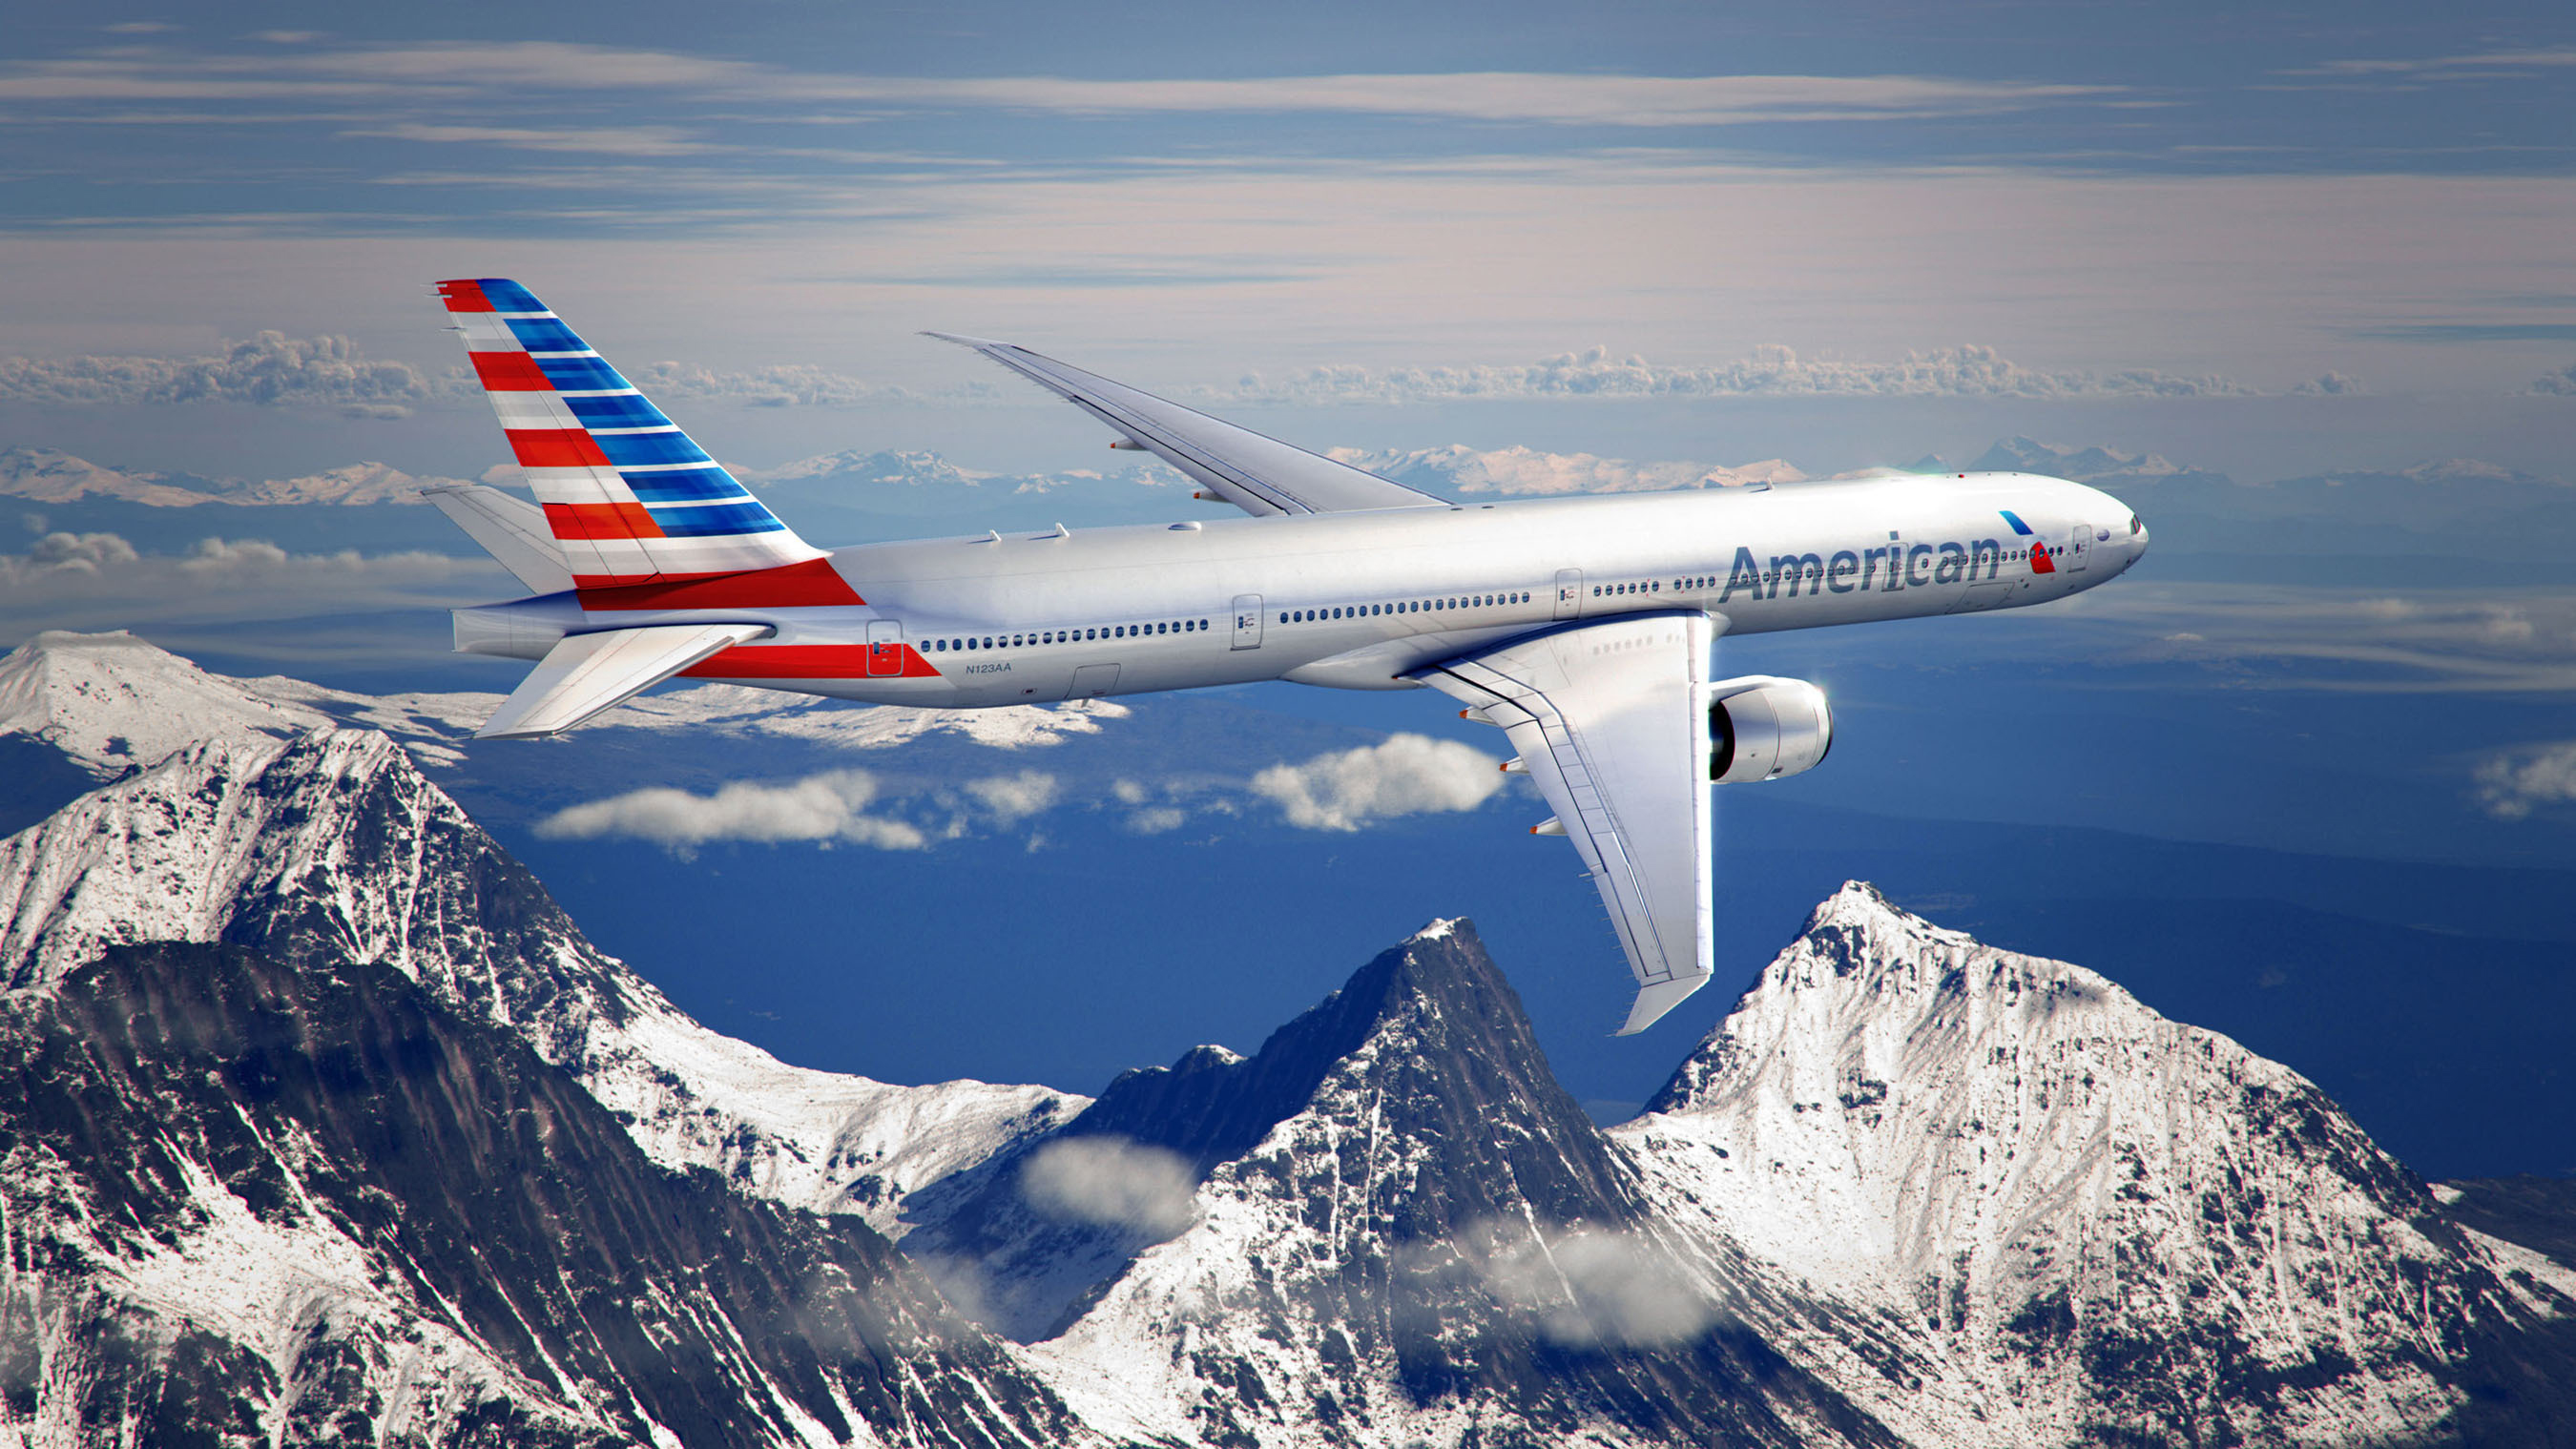 AMERICAN AIRLINES NEW LOOK